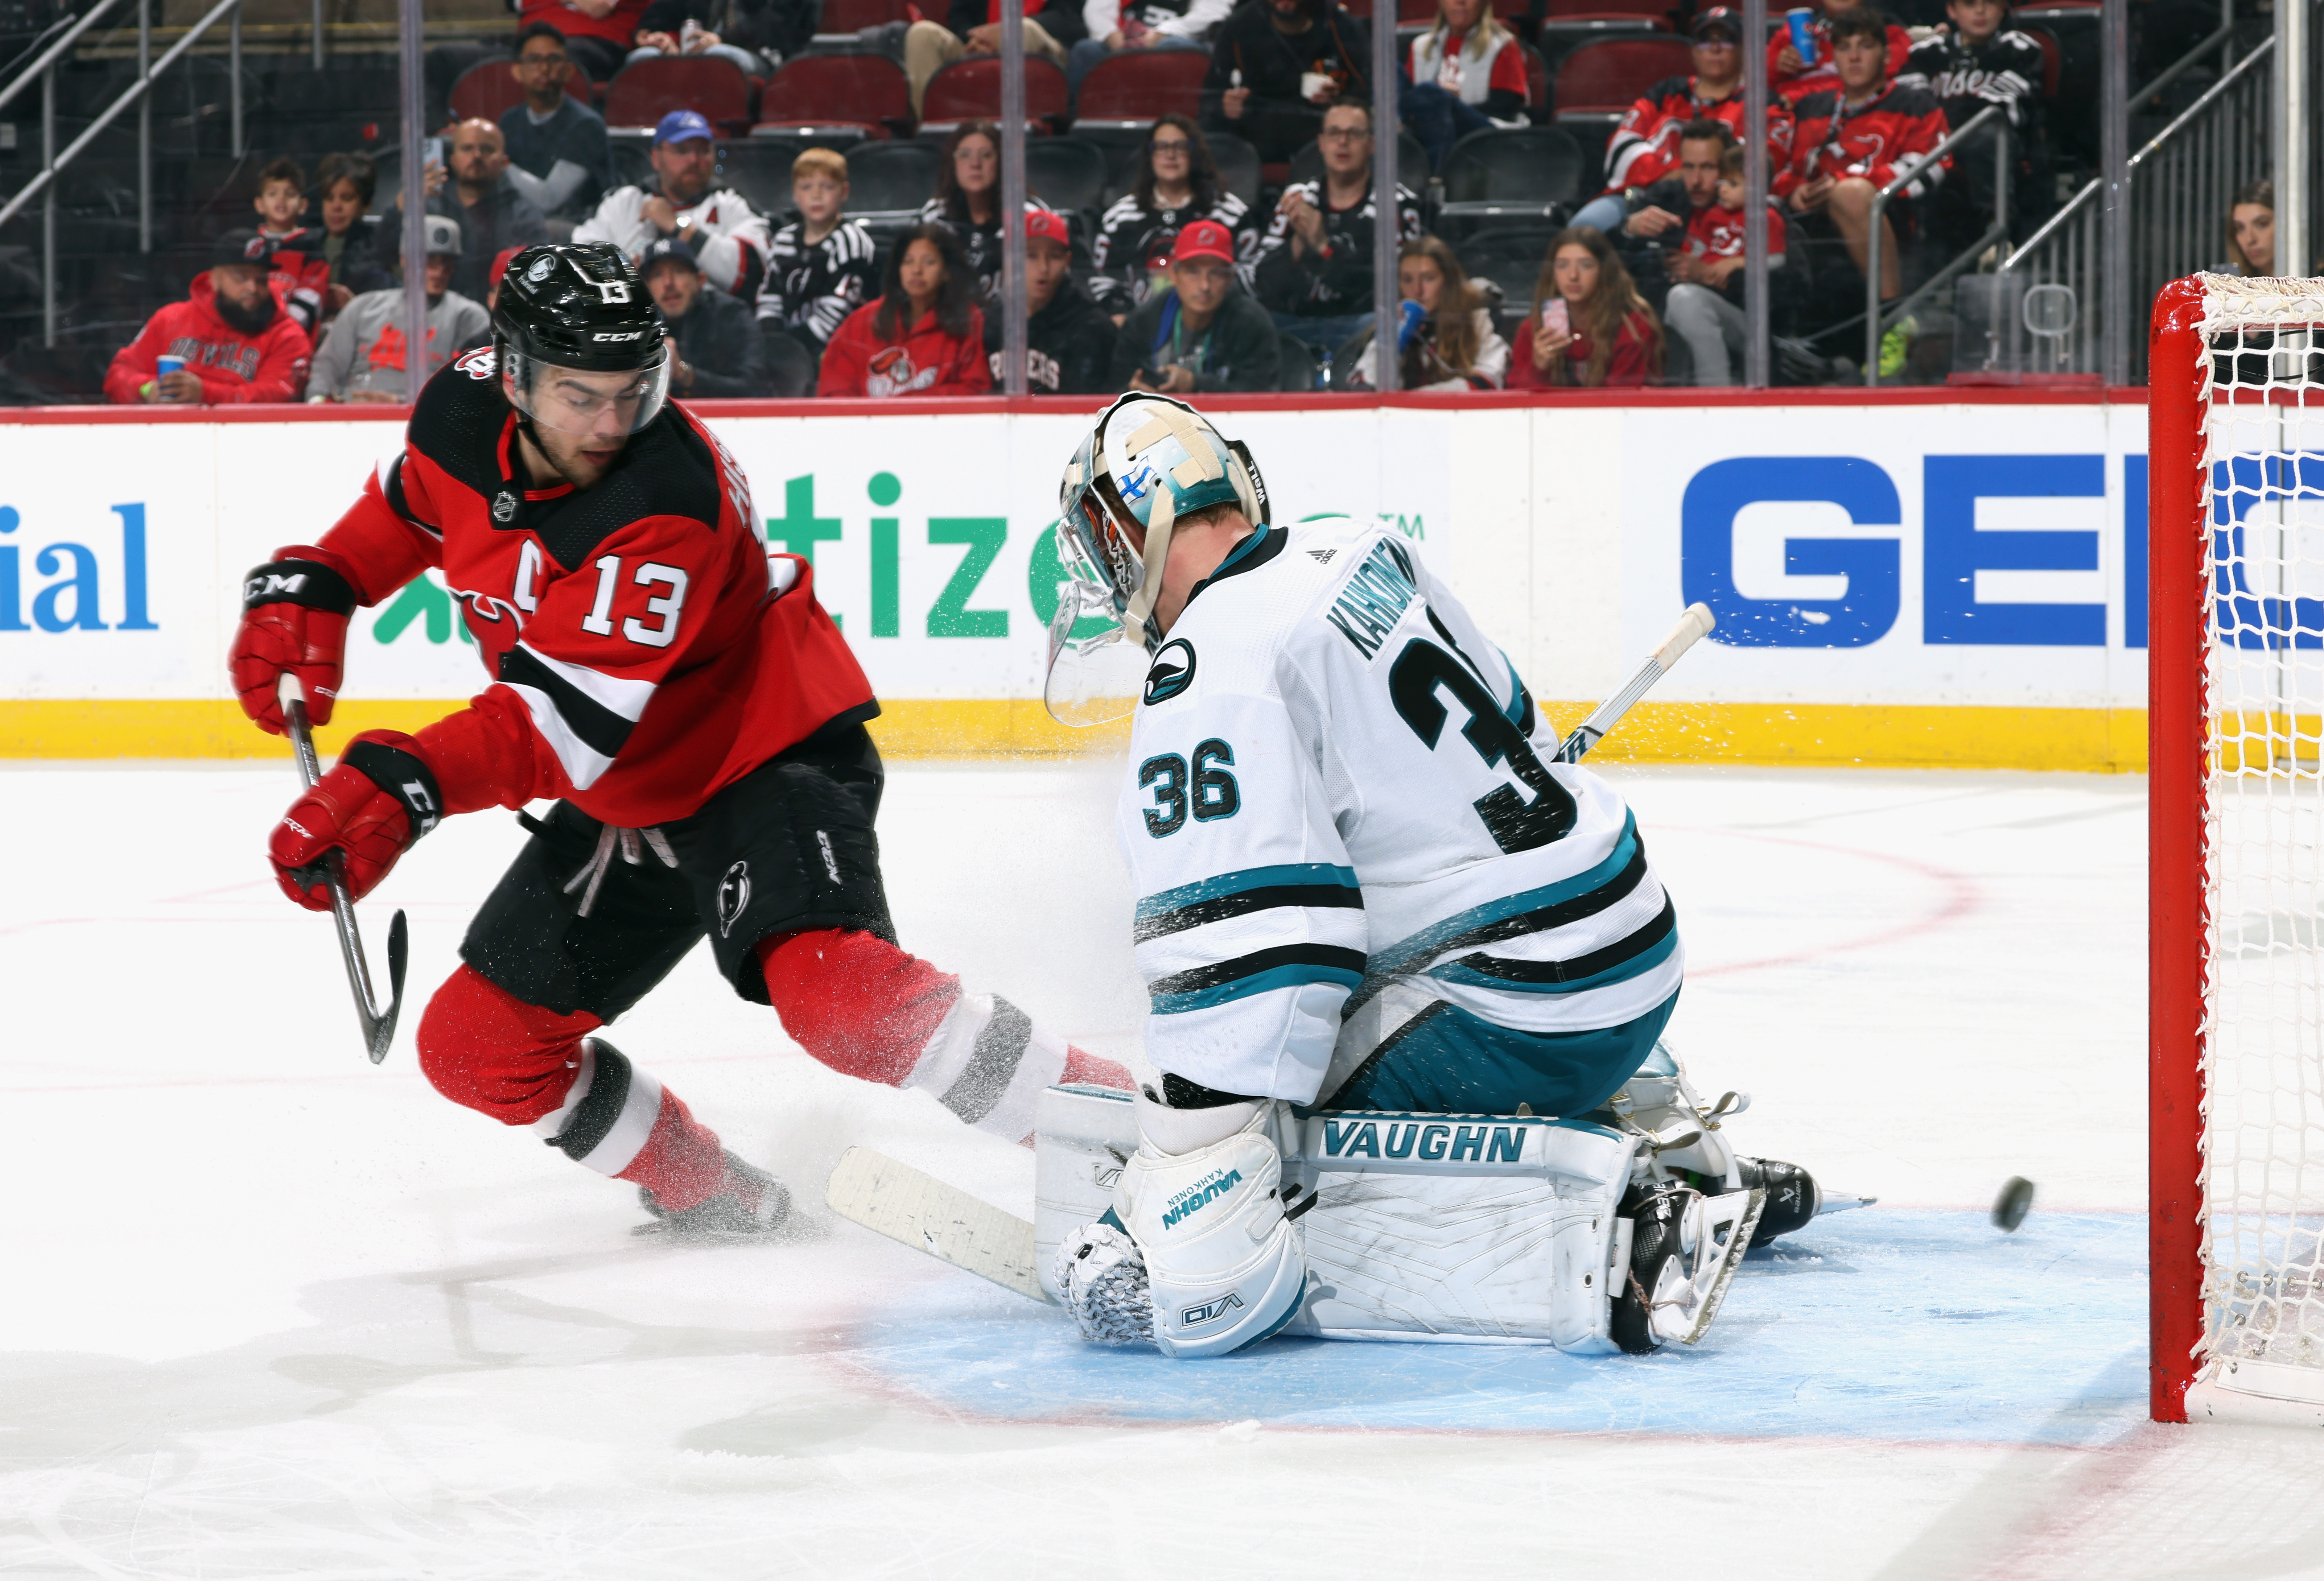 Nico Hischier #13 of the New Jersey Devils gets the puck past Kaapo Kahkonen #36 of the San Jose Sharks but the goal was disallowed during the second period for directing the puck with the skate at the Prudential Center on October 22, 2022 in Newark, New Jersey.